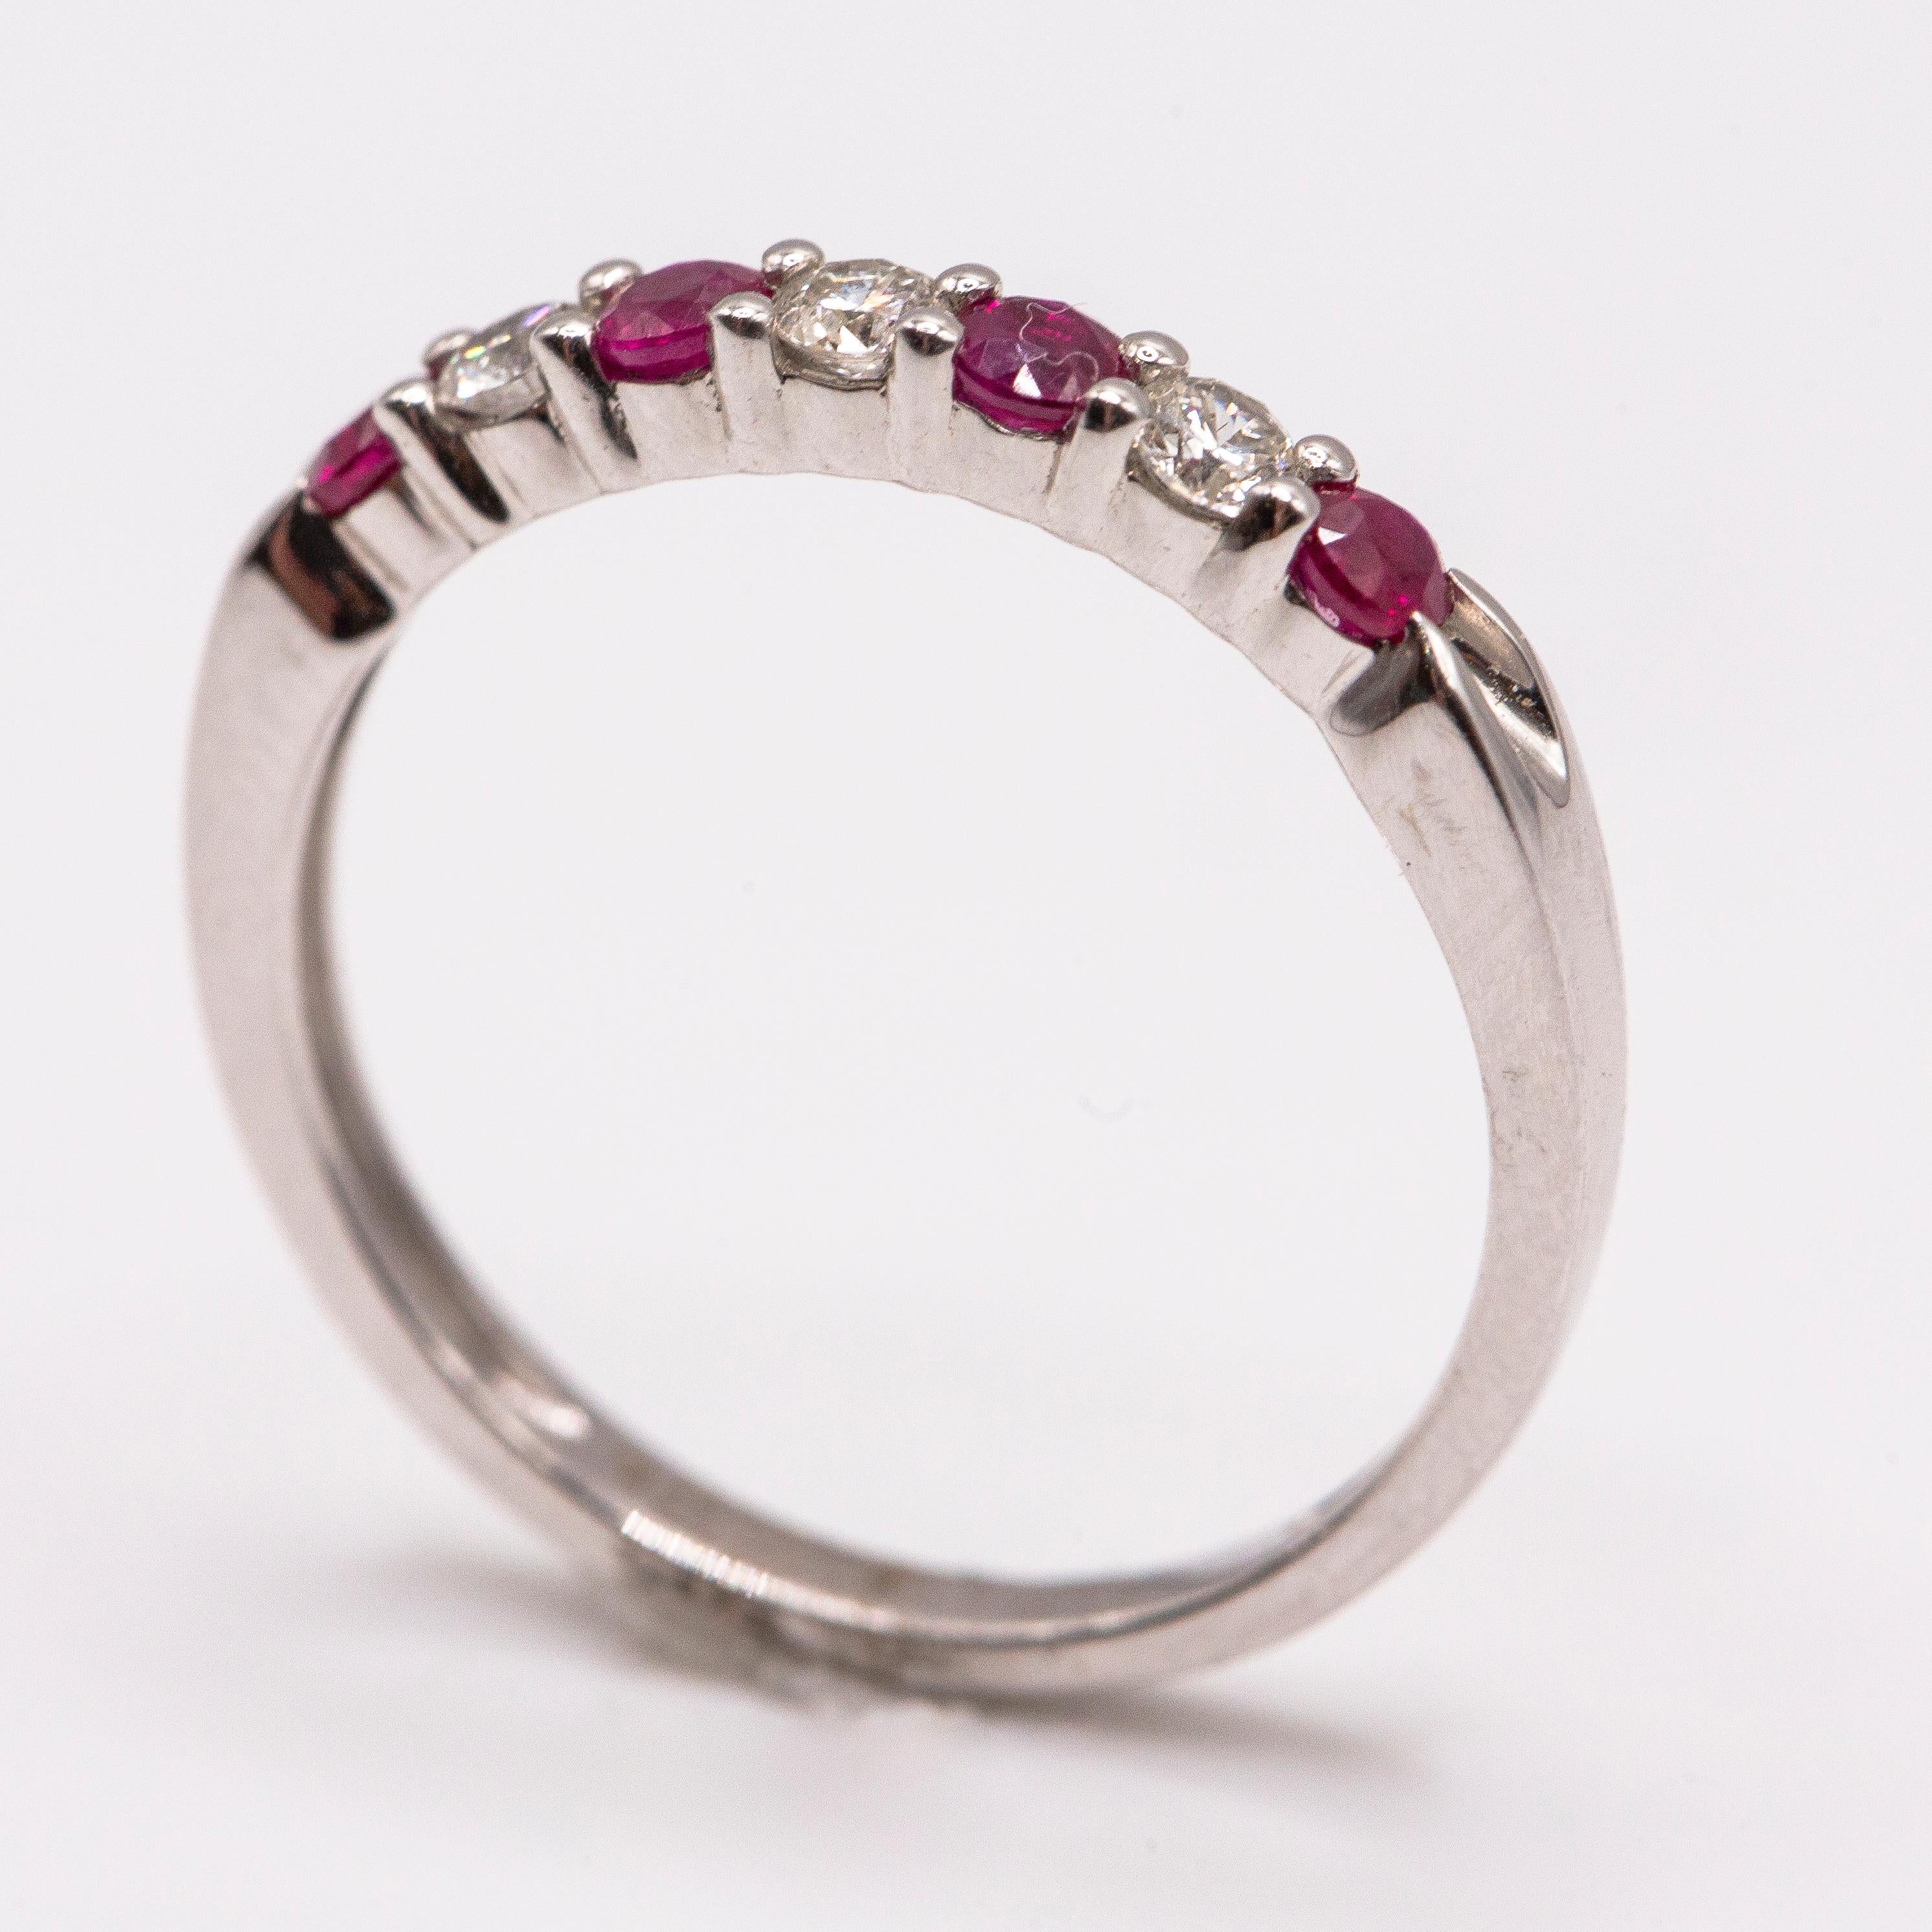  A 14k high polished contemporary band set with alternating fine white diamonds and deep, bright red natural rubies. Diamonds 0.10 carats total. Rubies 0.16 carats total.